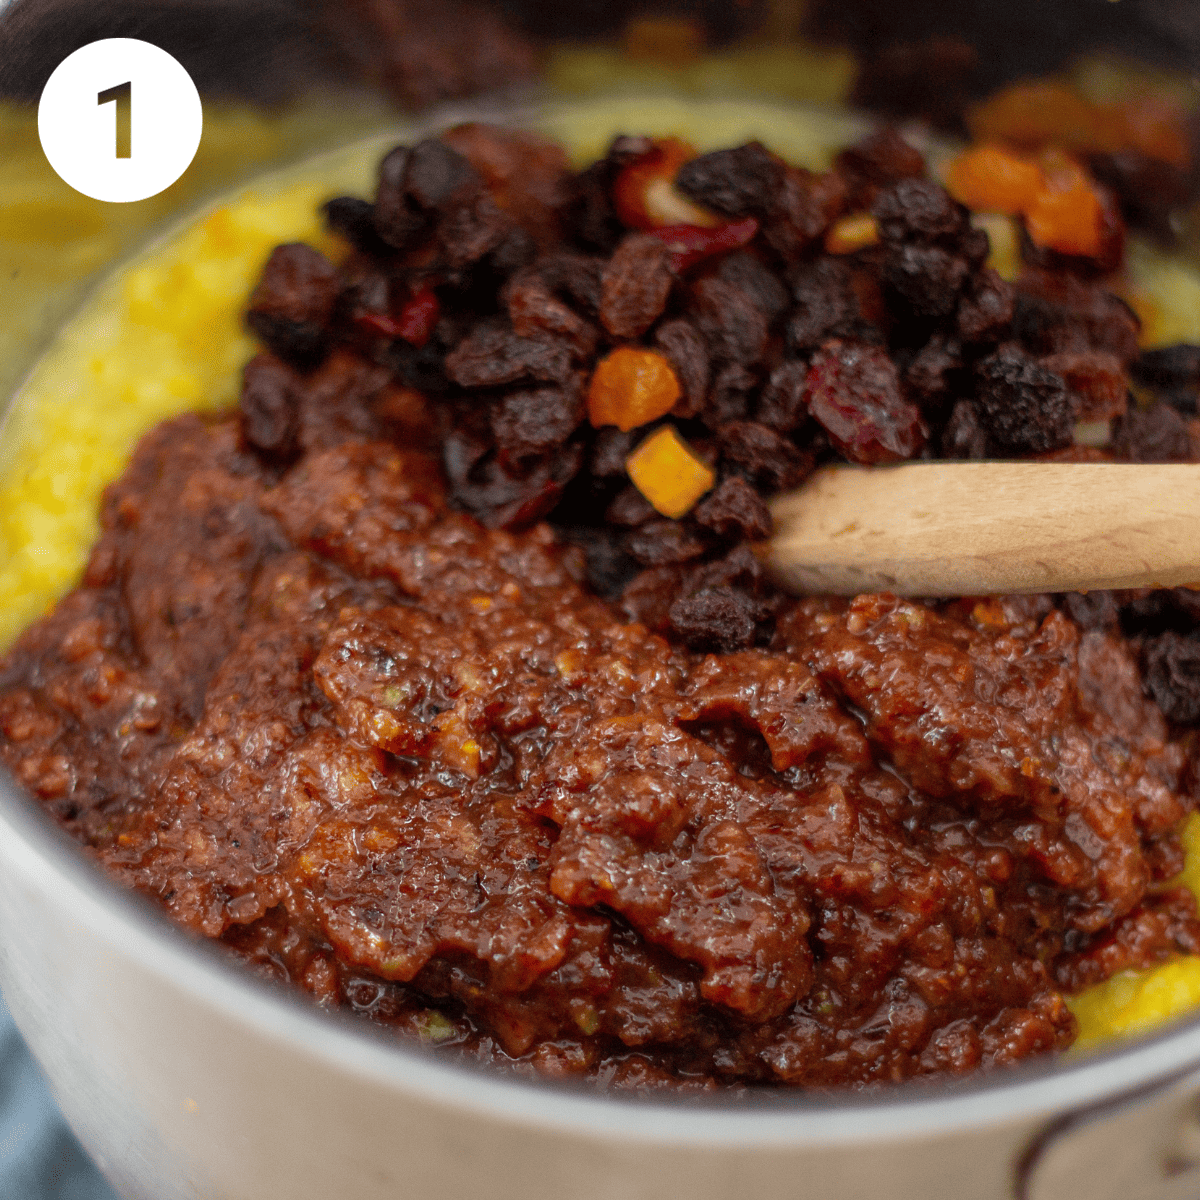 Adding dried fruit to pan to make mincemeat.